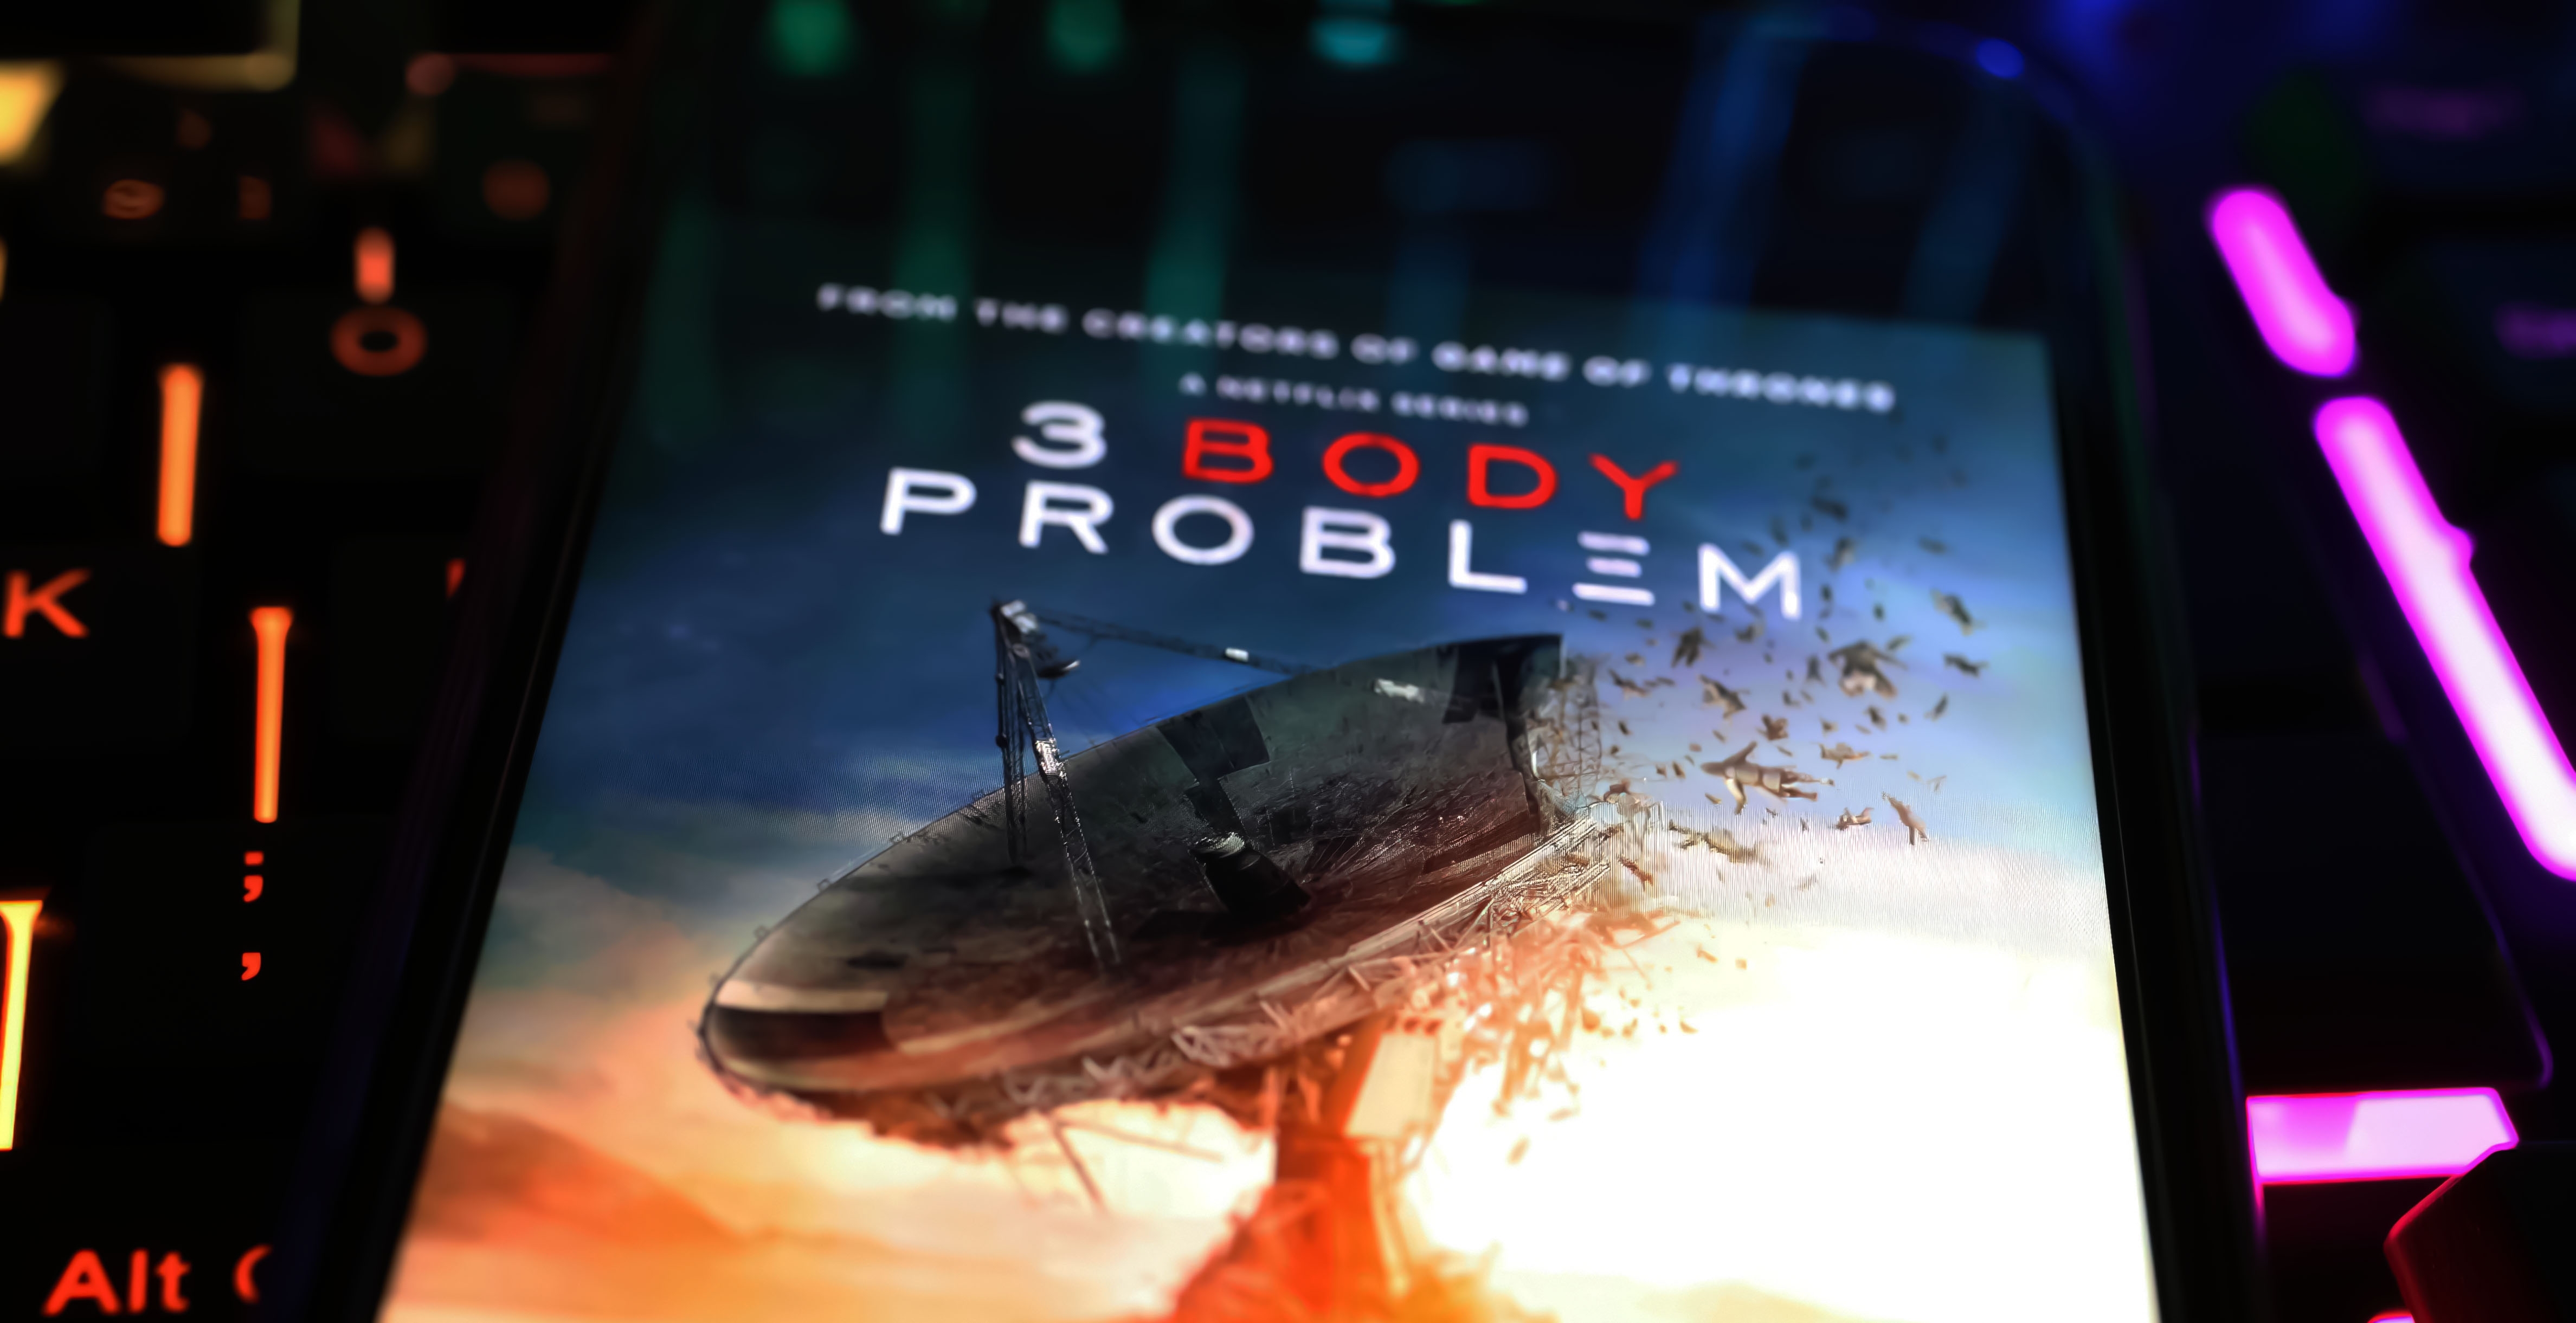 The Science Behind Netflix's '3 Body Problem,' As Explained By Astrophysics Expert Paul Sutter - DISCOVER Magazine